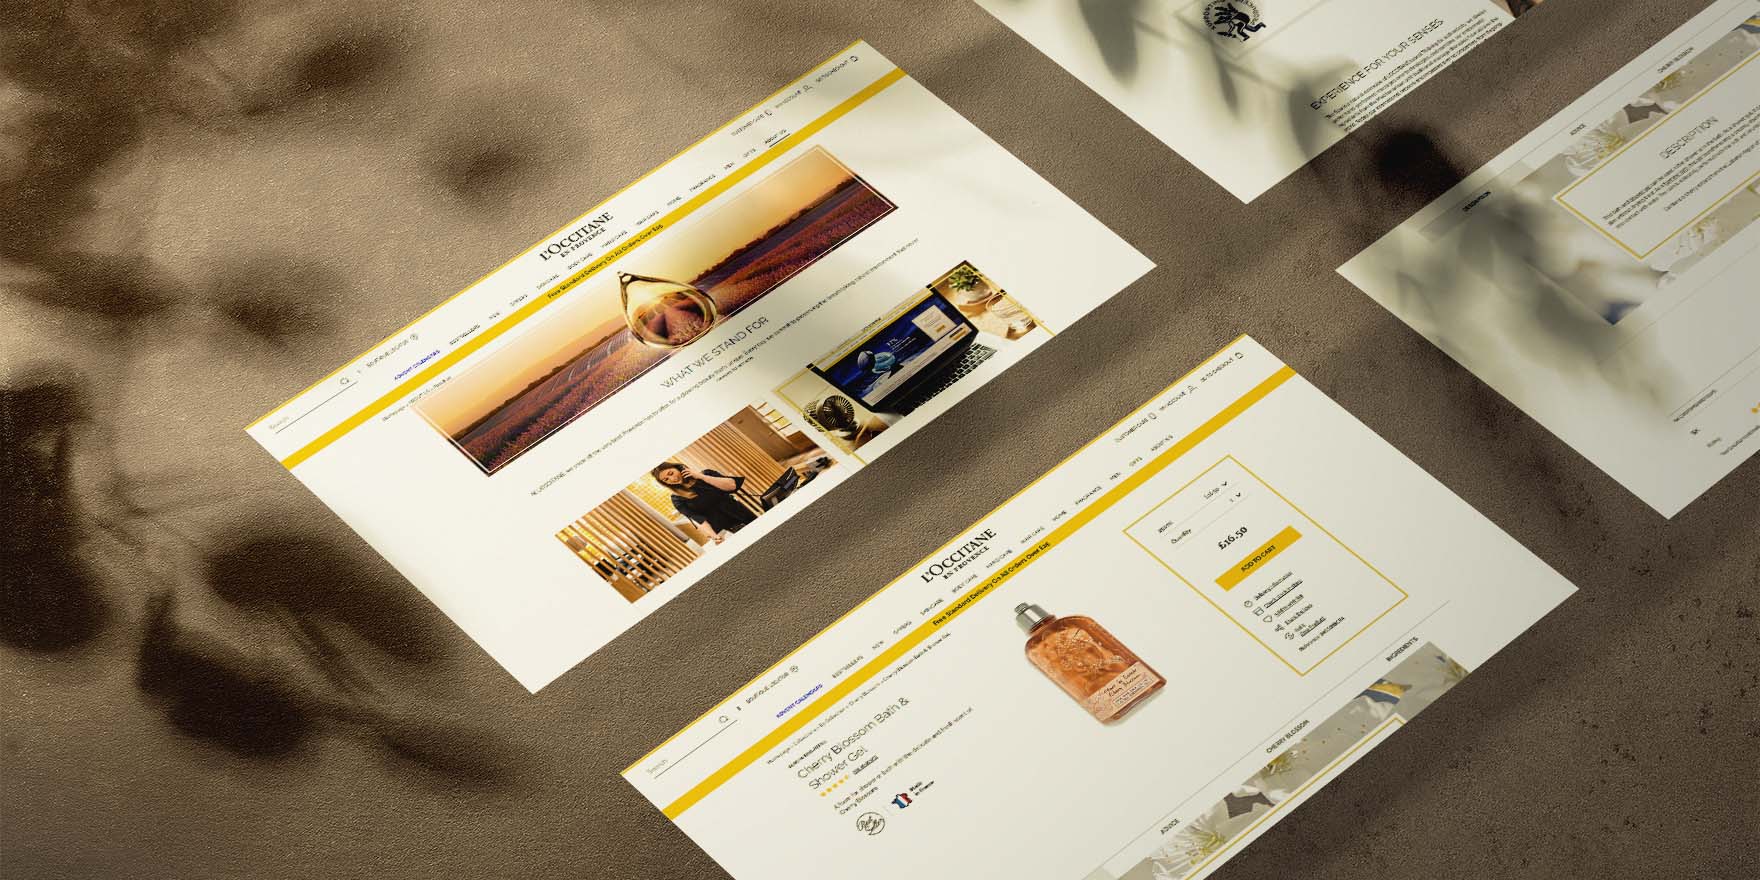 Overhead view of sections from a Shopify theme designed by WeCanFly agency, showcasing product images, branding elements, and site navigation, laid out on a textured sandy background.